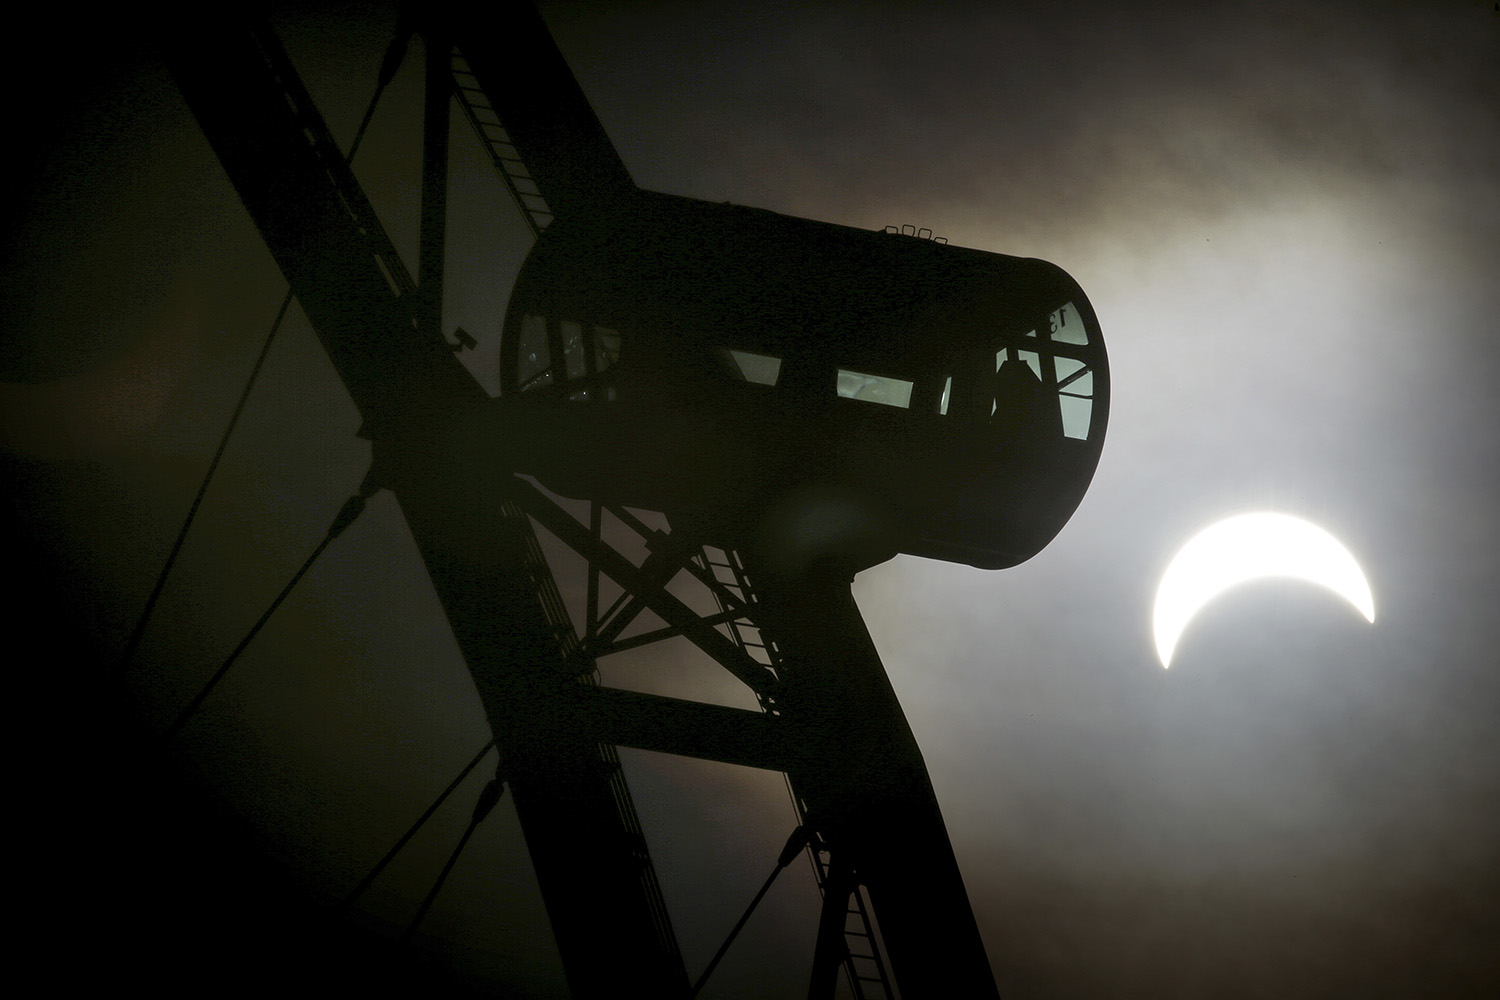 Yesterday’s Solar Eclipse Looks Stunning In These Captivating Images